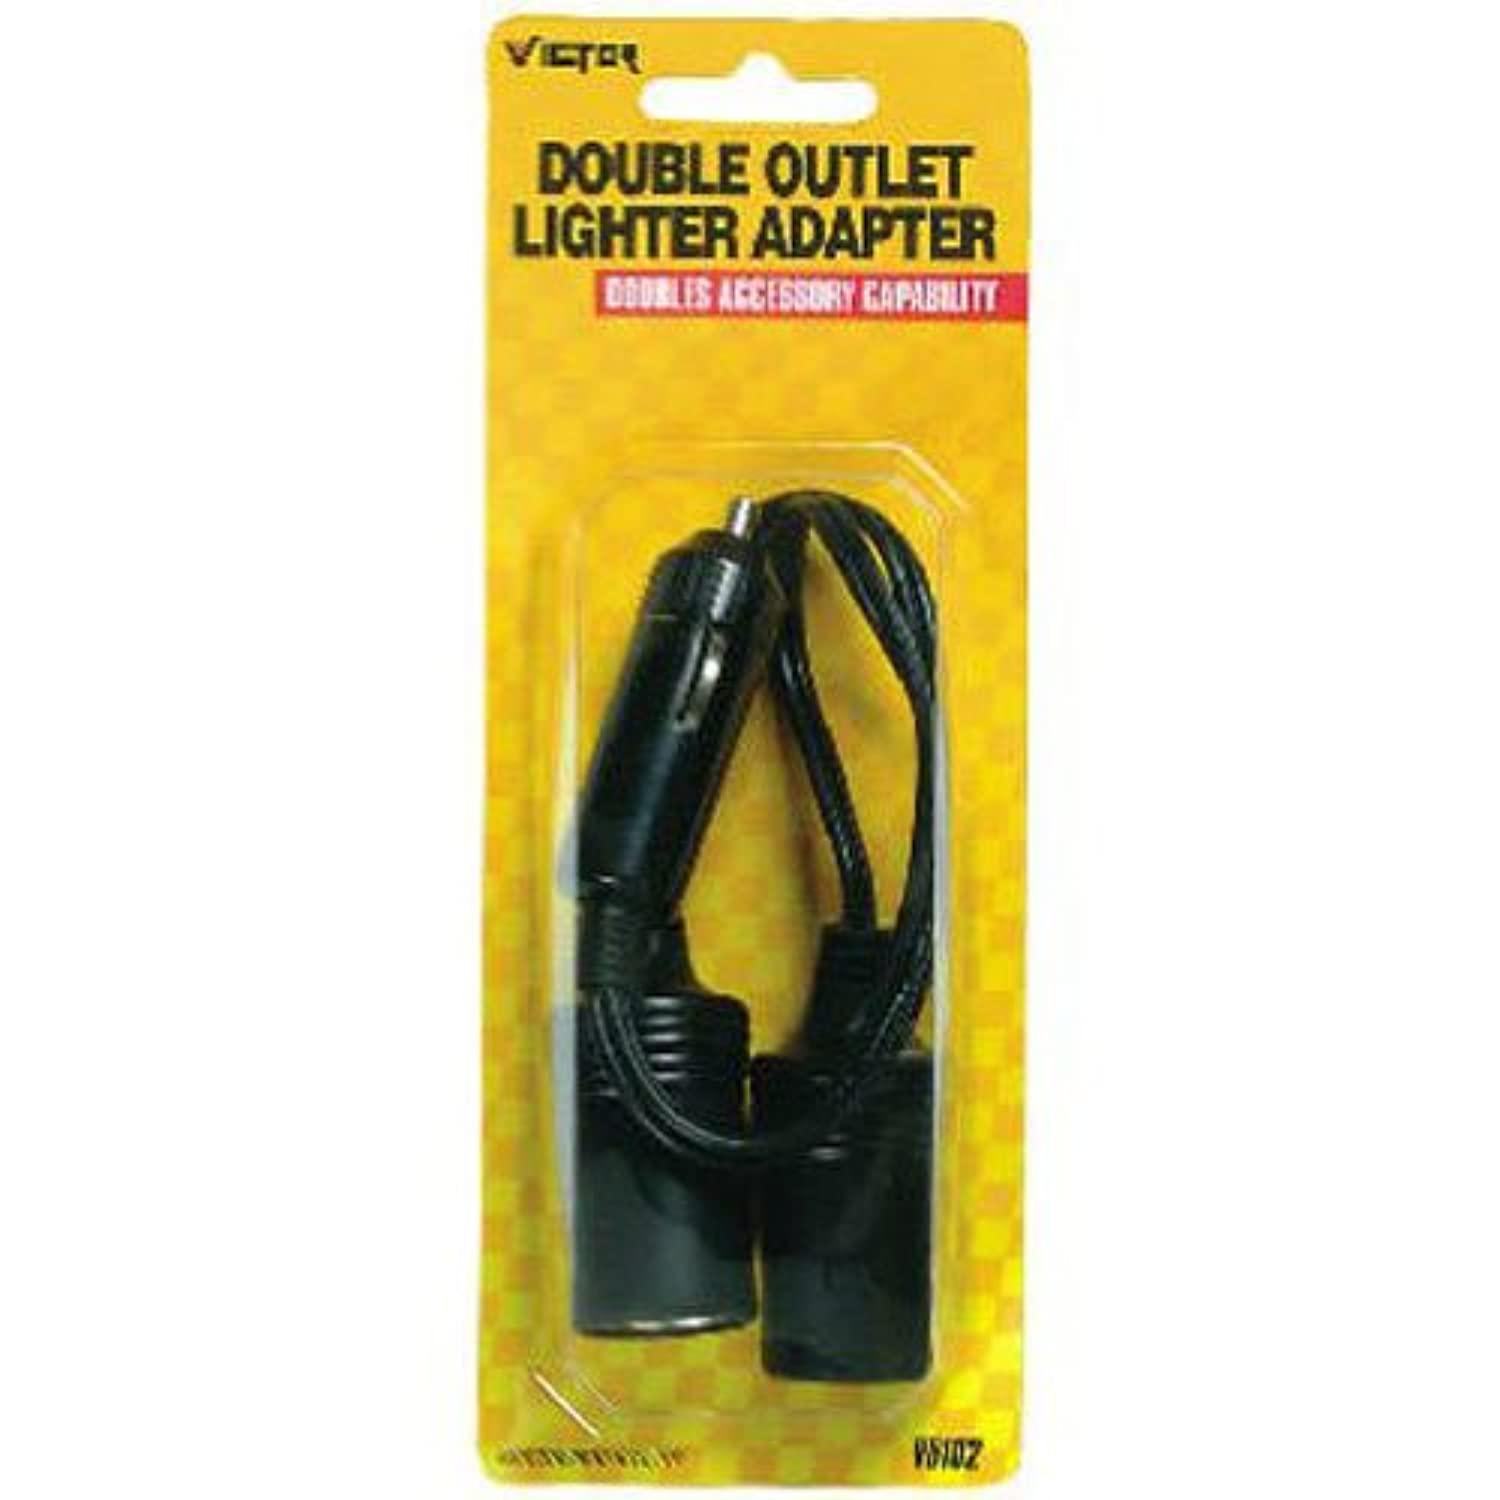 Victor Equipment victor 22-5-05102-8 double outlet lighter adapter